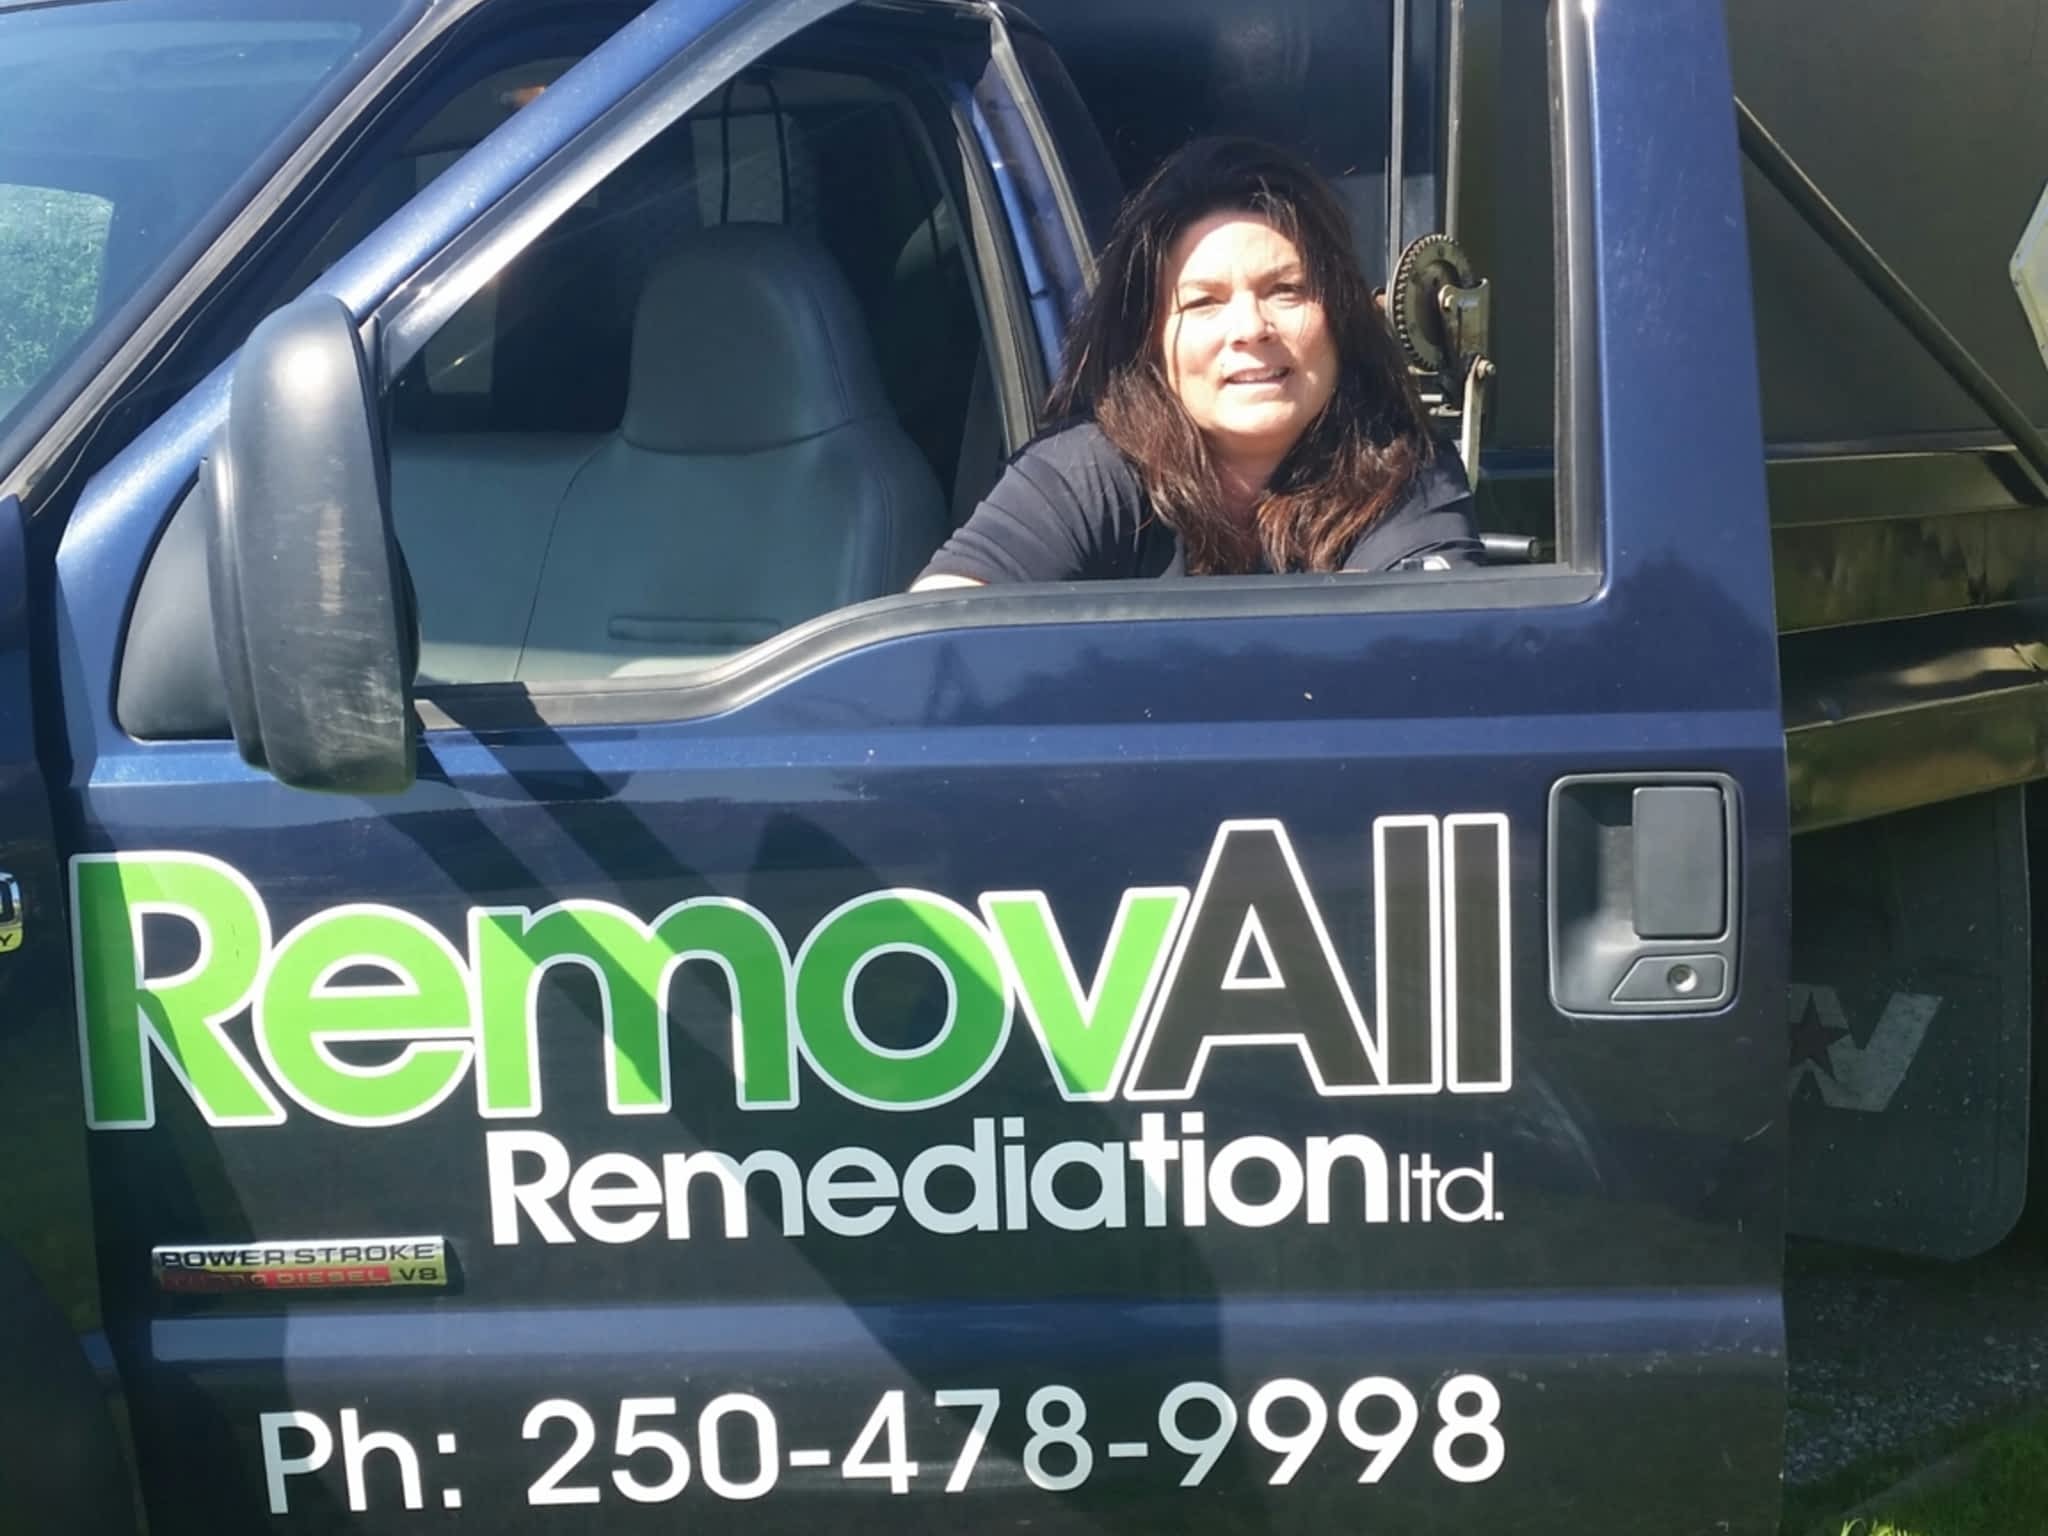 photo Removall Remediation Services